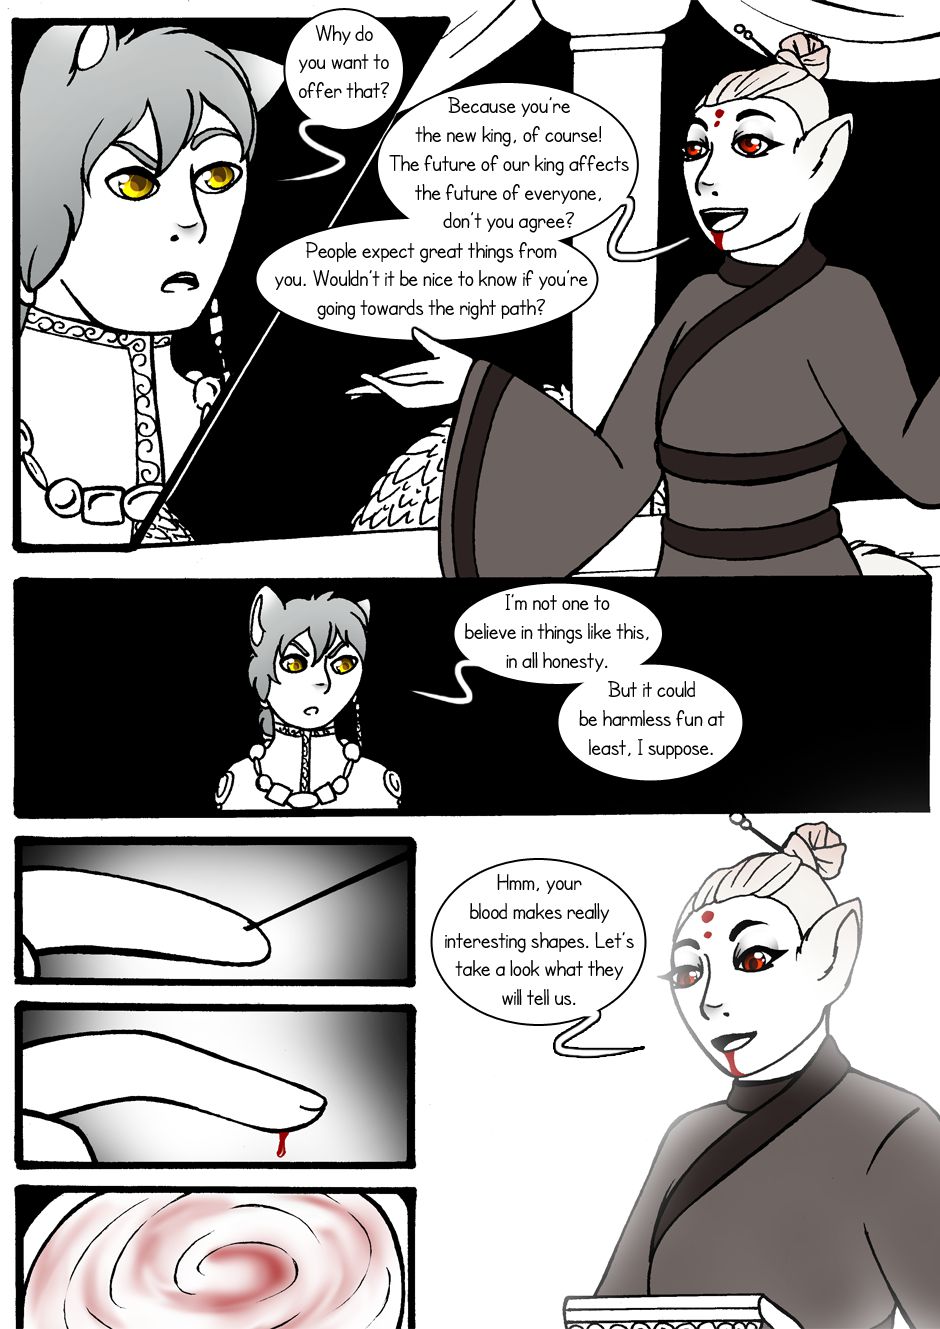 [Jeny-jen94]Between Kings and Queens[ongoing] 26